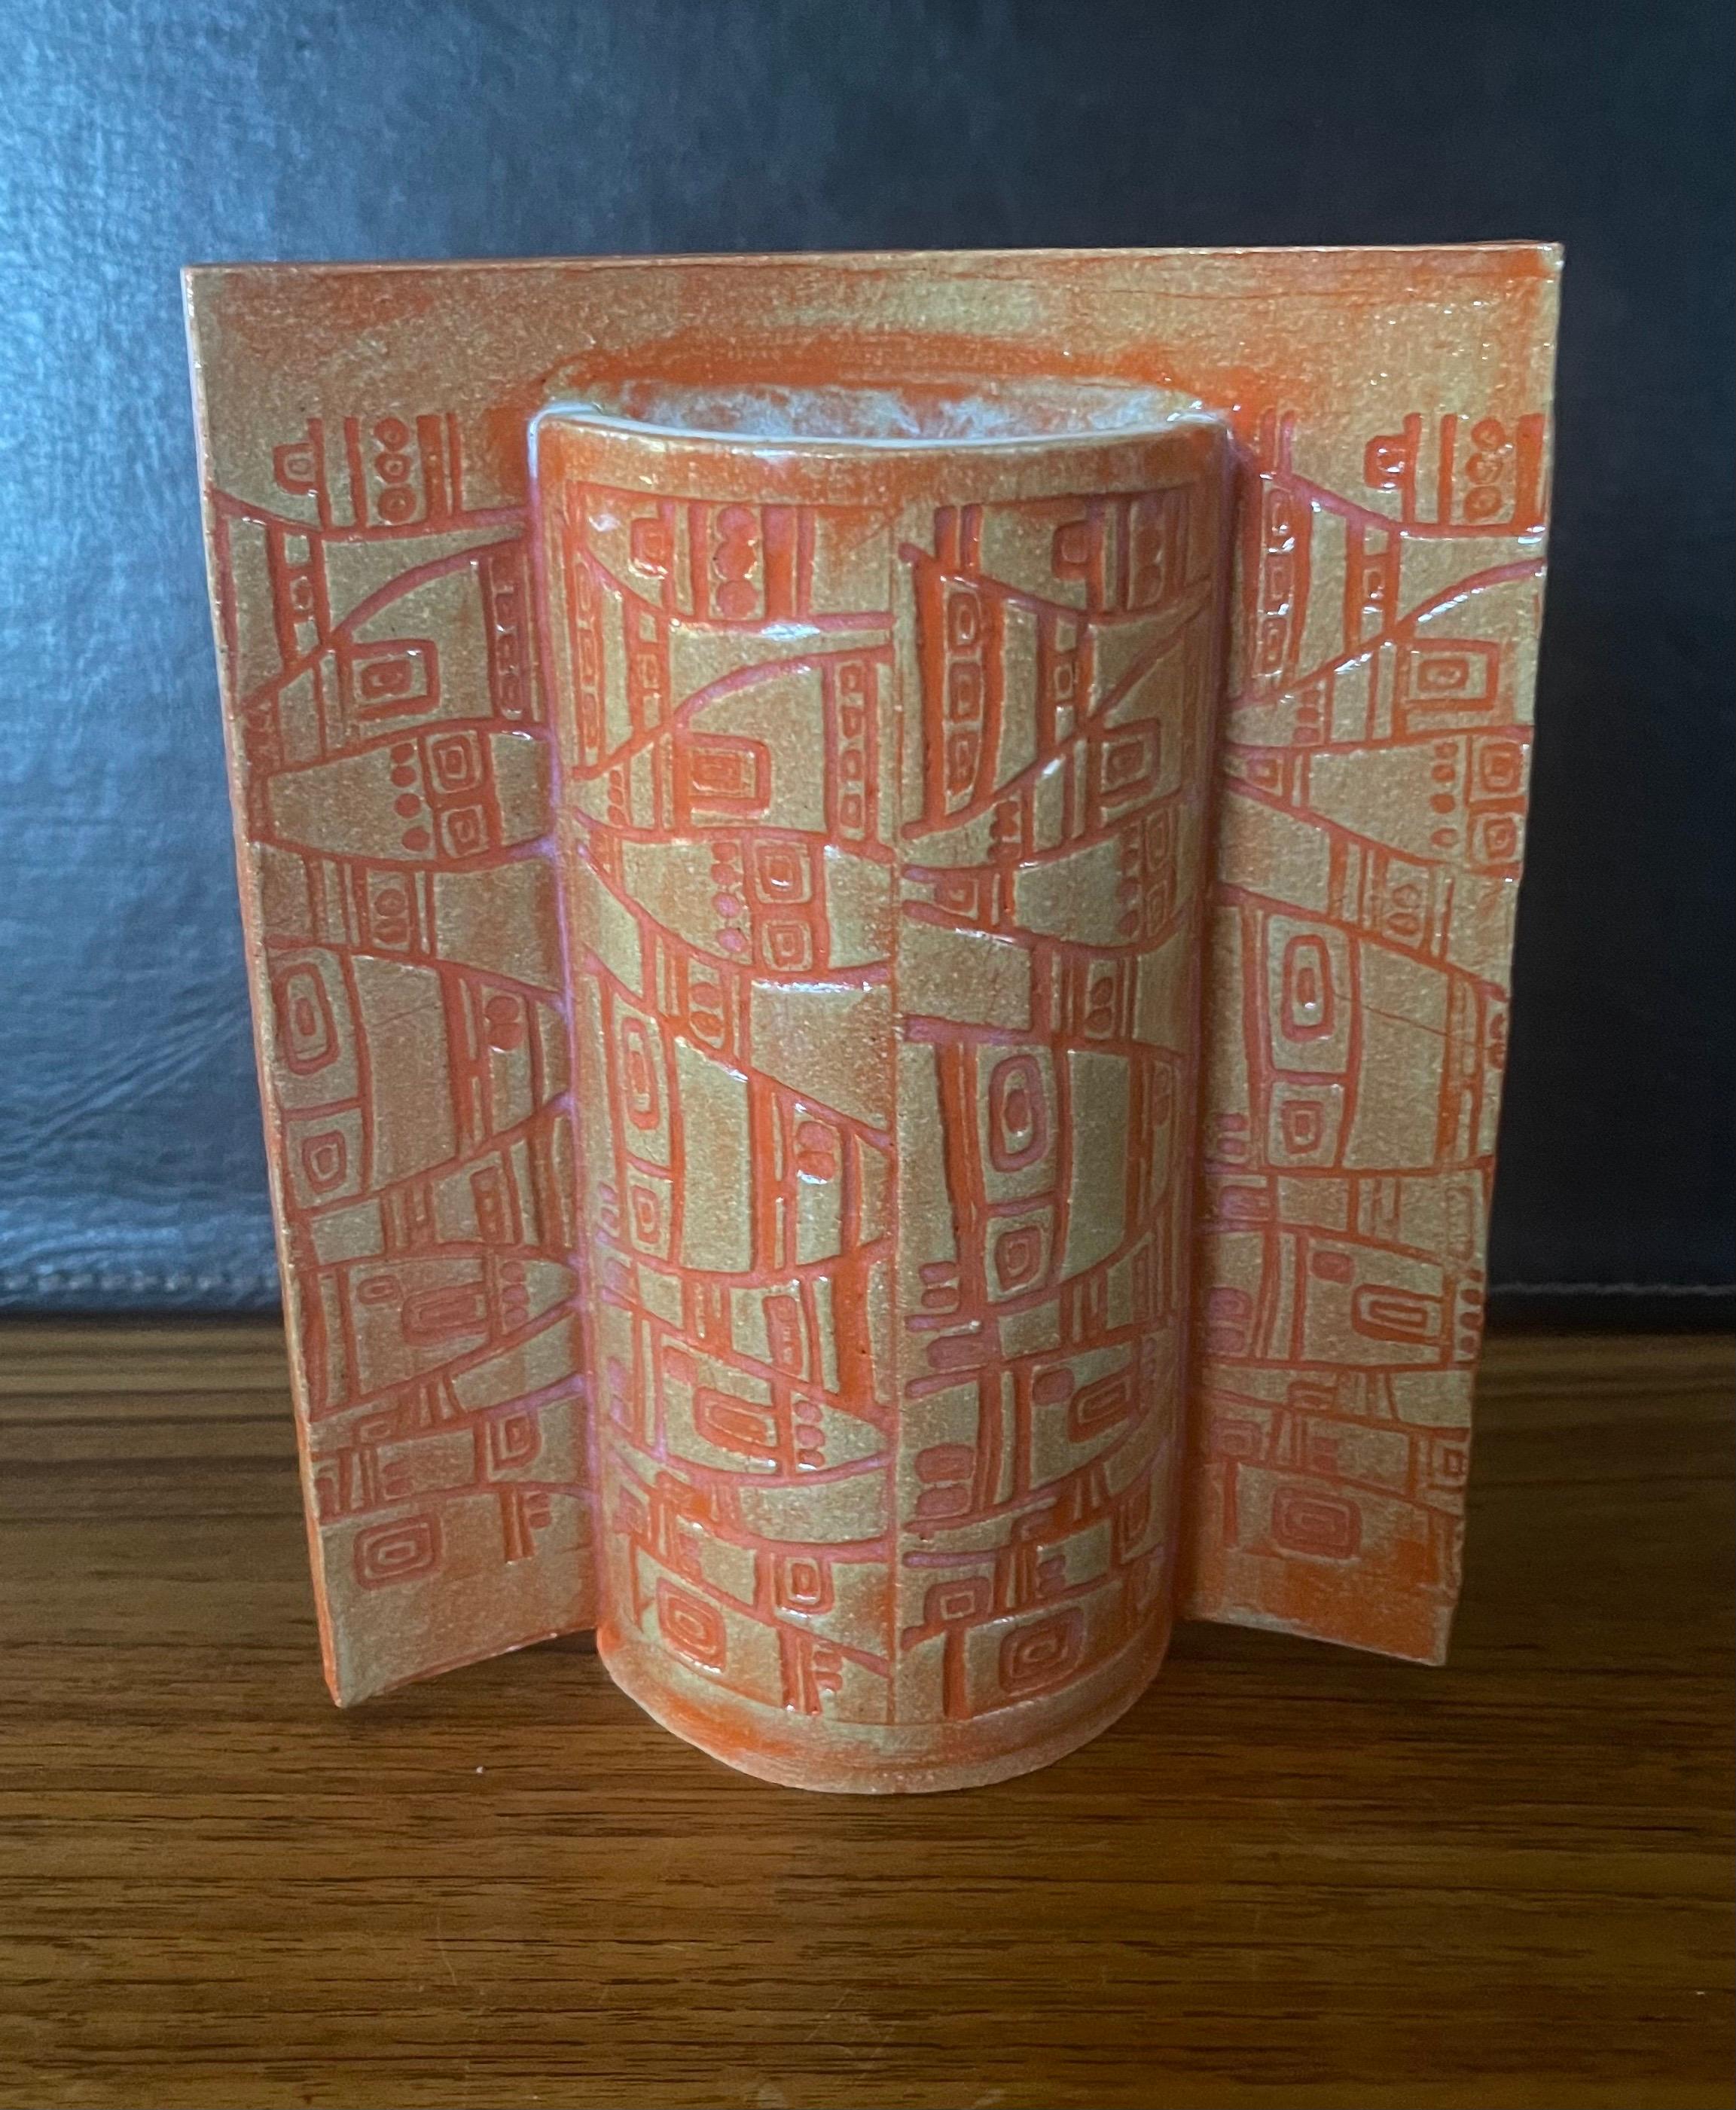 Unique shape earthenware studio pottery MCM vase, circa 1970s. The piece is in very good vintage condition and measures 6.5